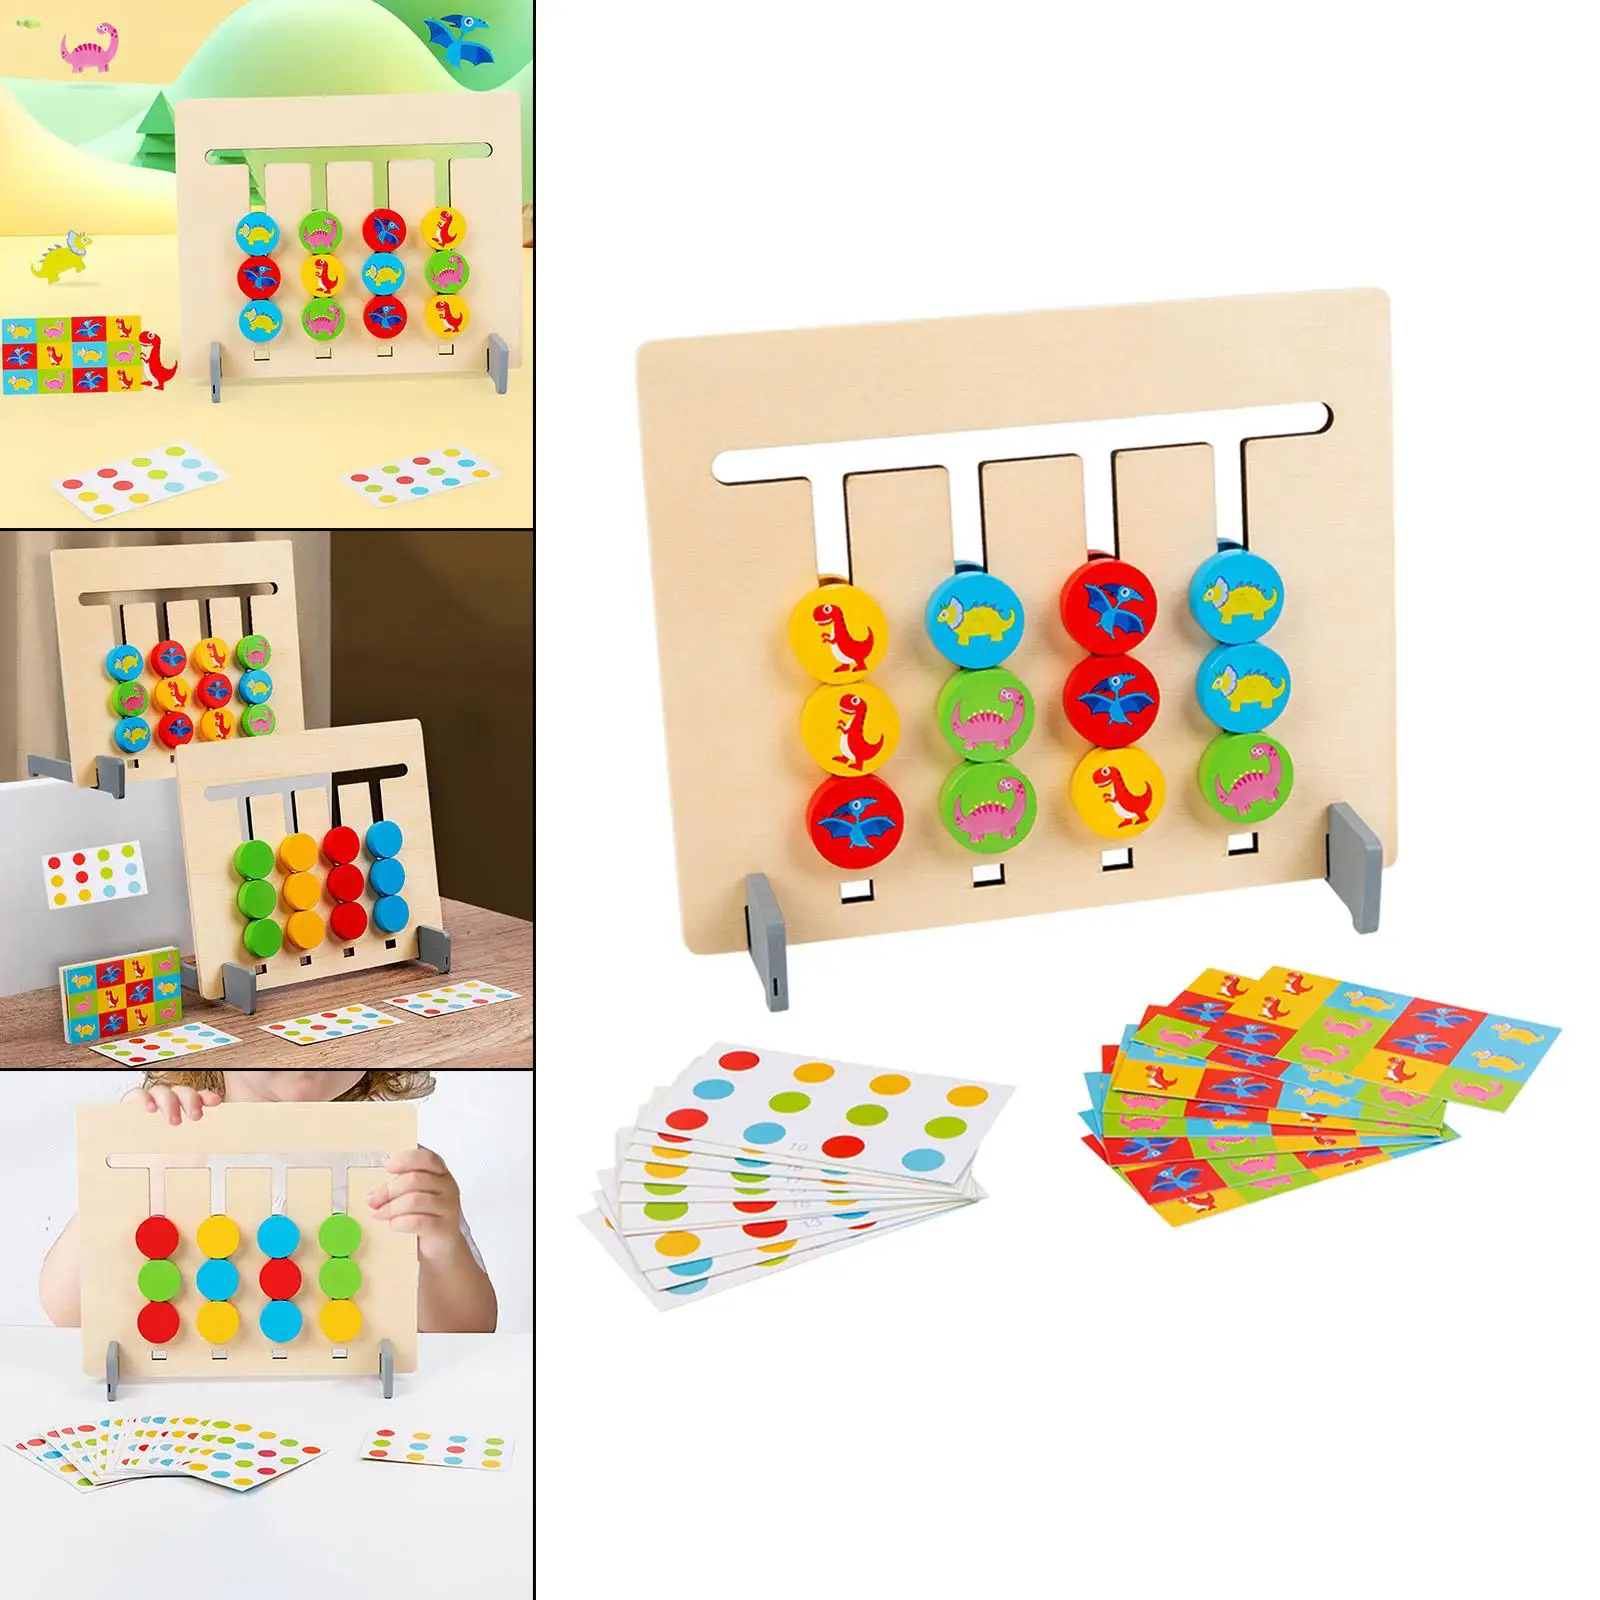 Montessori Slide Puzzle Toy Game Learning Educational Shape Color Sorting Matching Game Blocks Puzzle for Children Toddlers